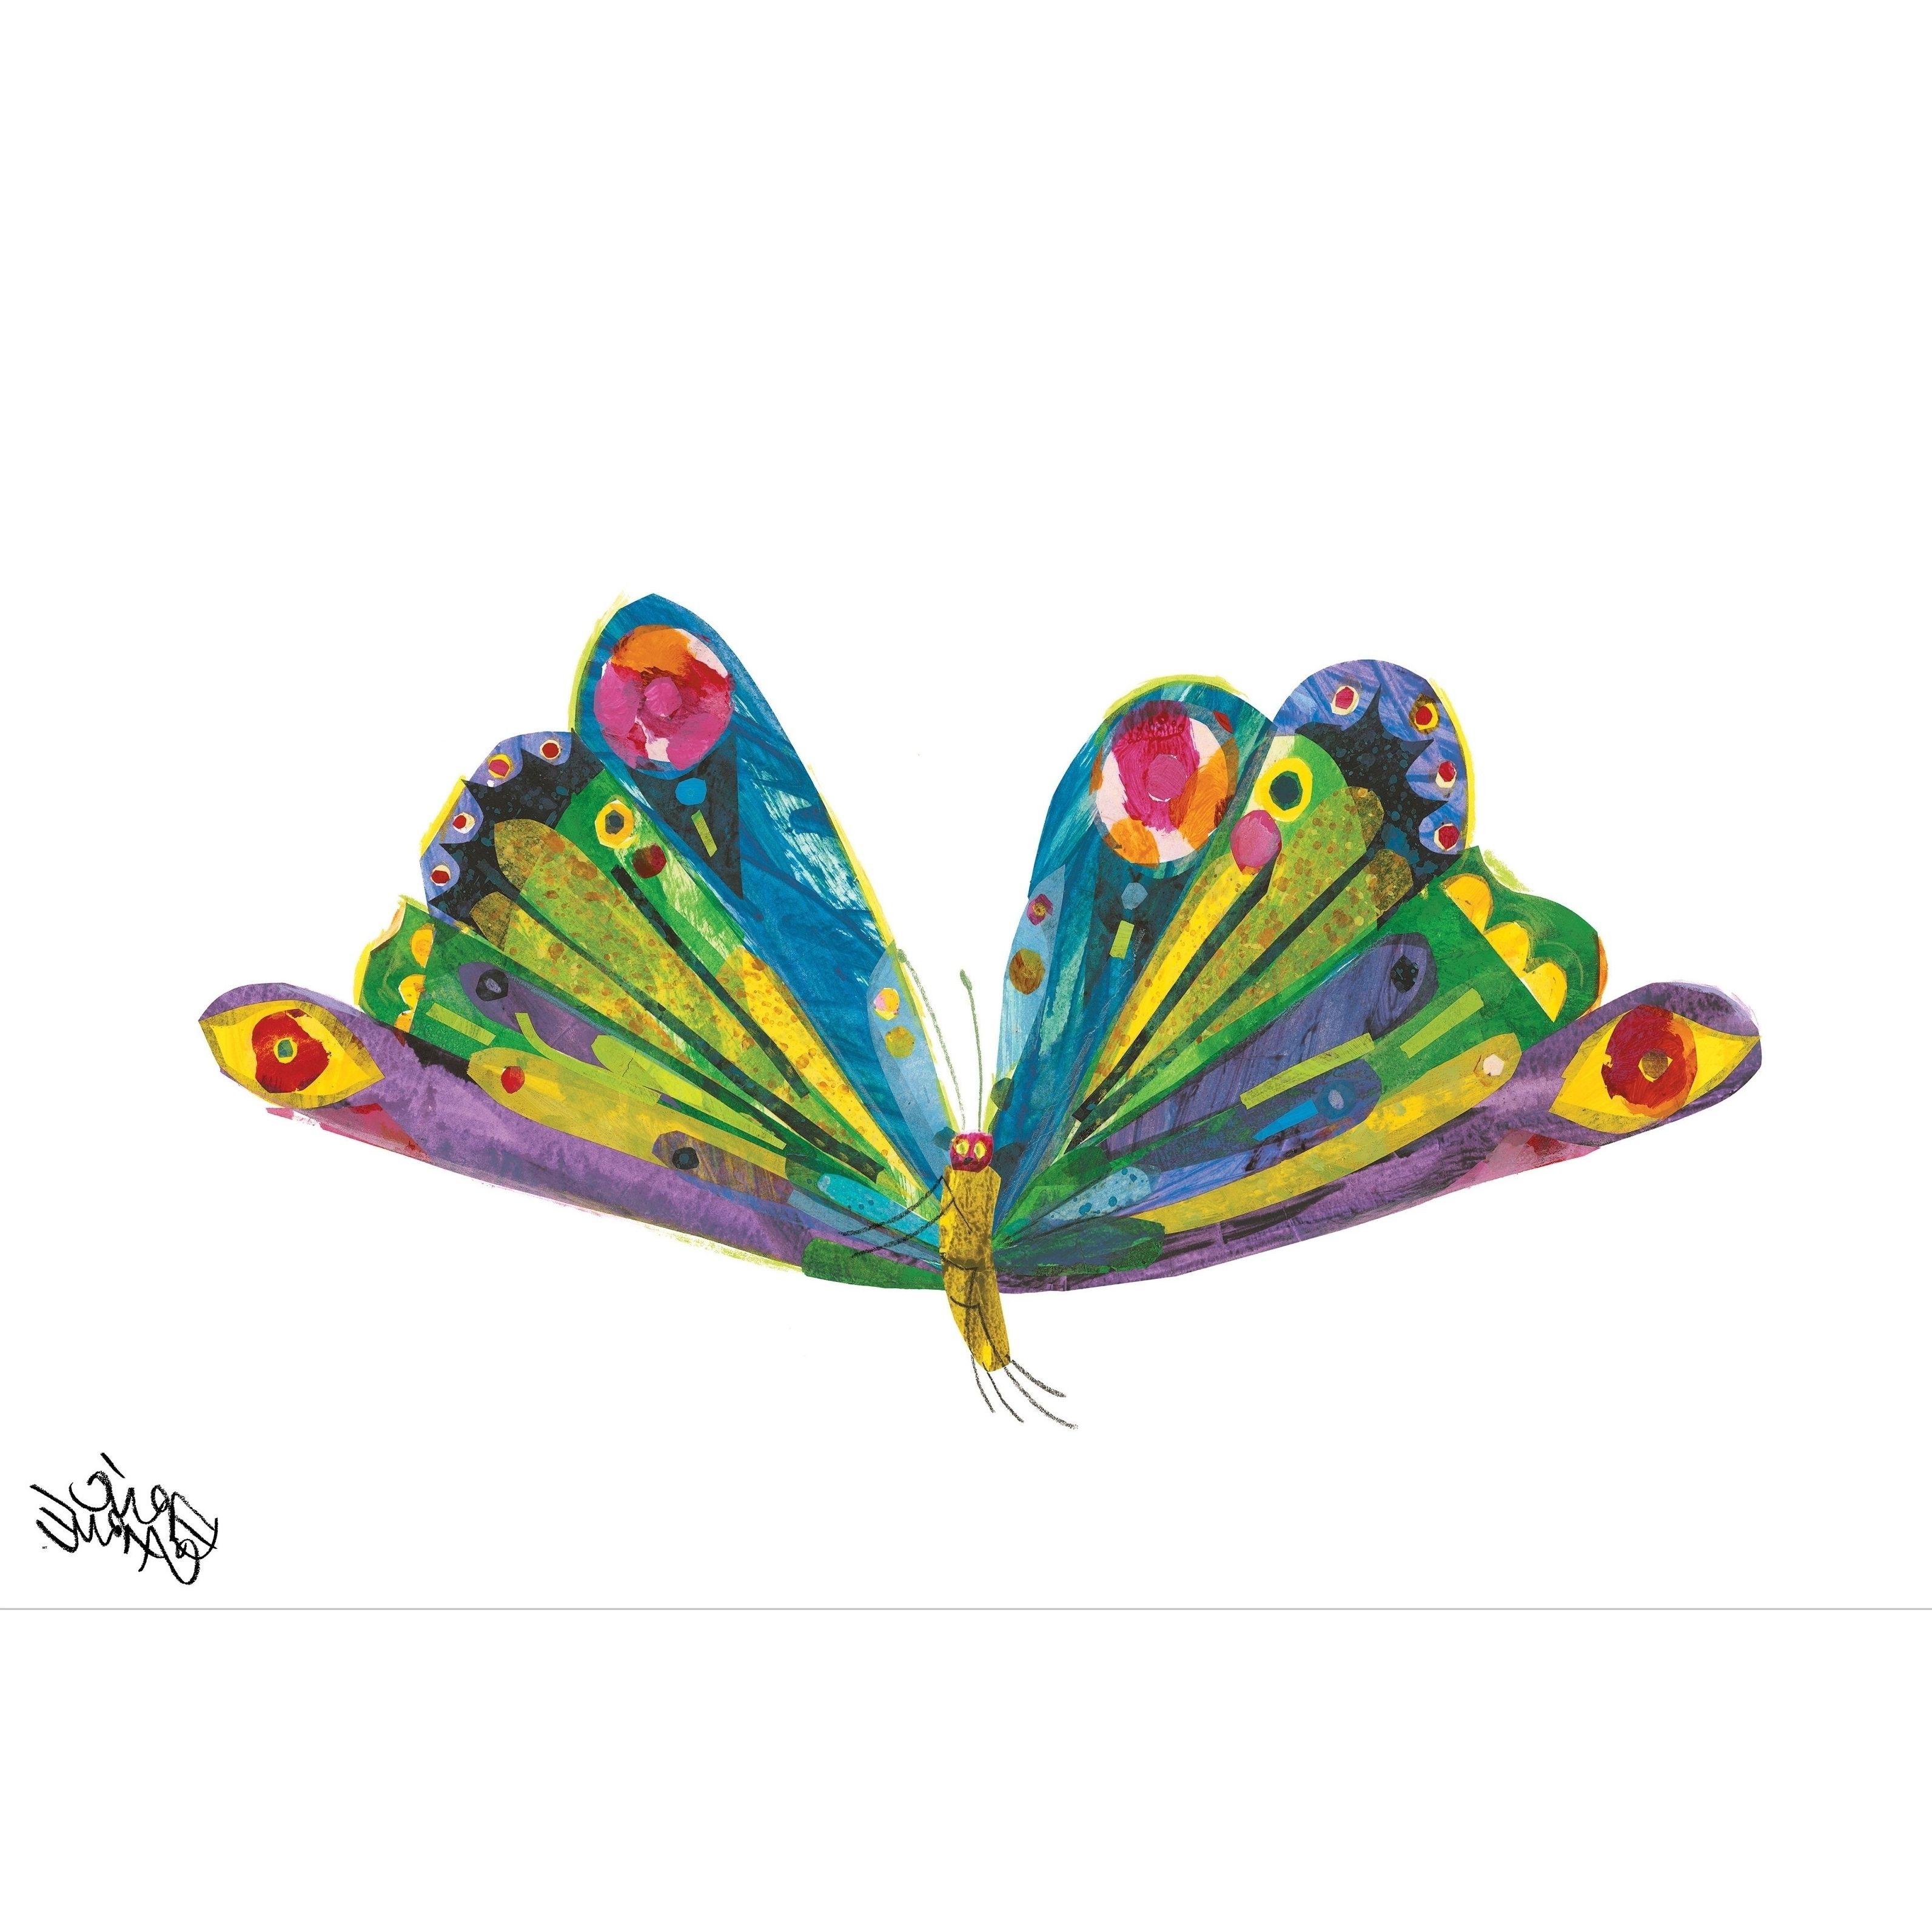 Trendy Eric Carle The Very Hungry Caterpillar Character Art Butterfly 1 Regarding Eric Carle Wall Art (View 11 of 15)